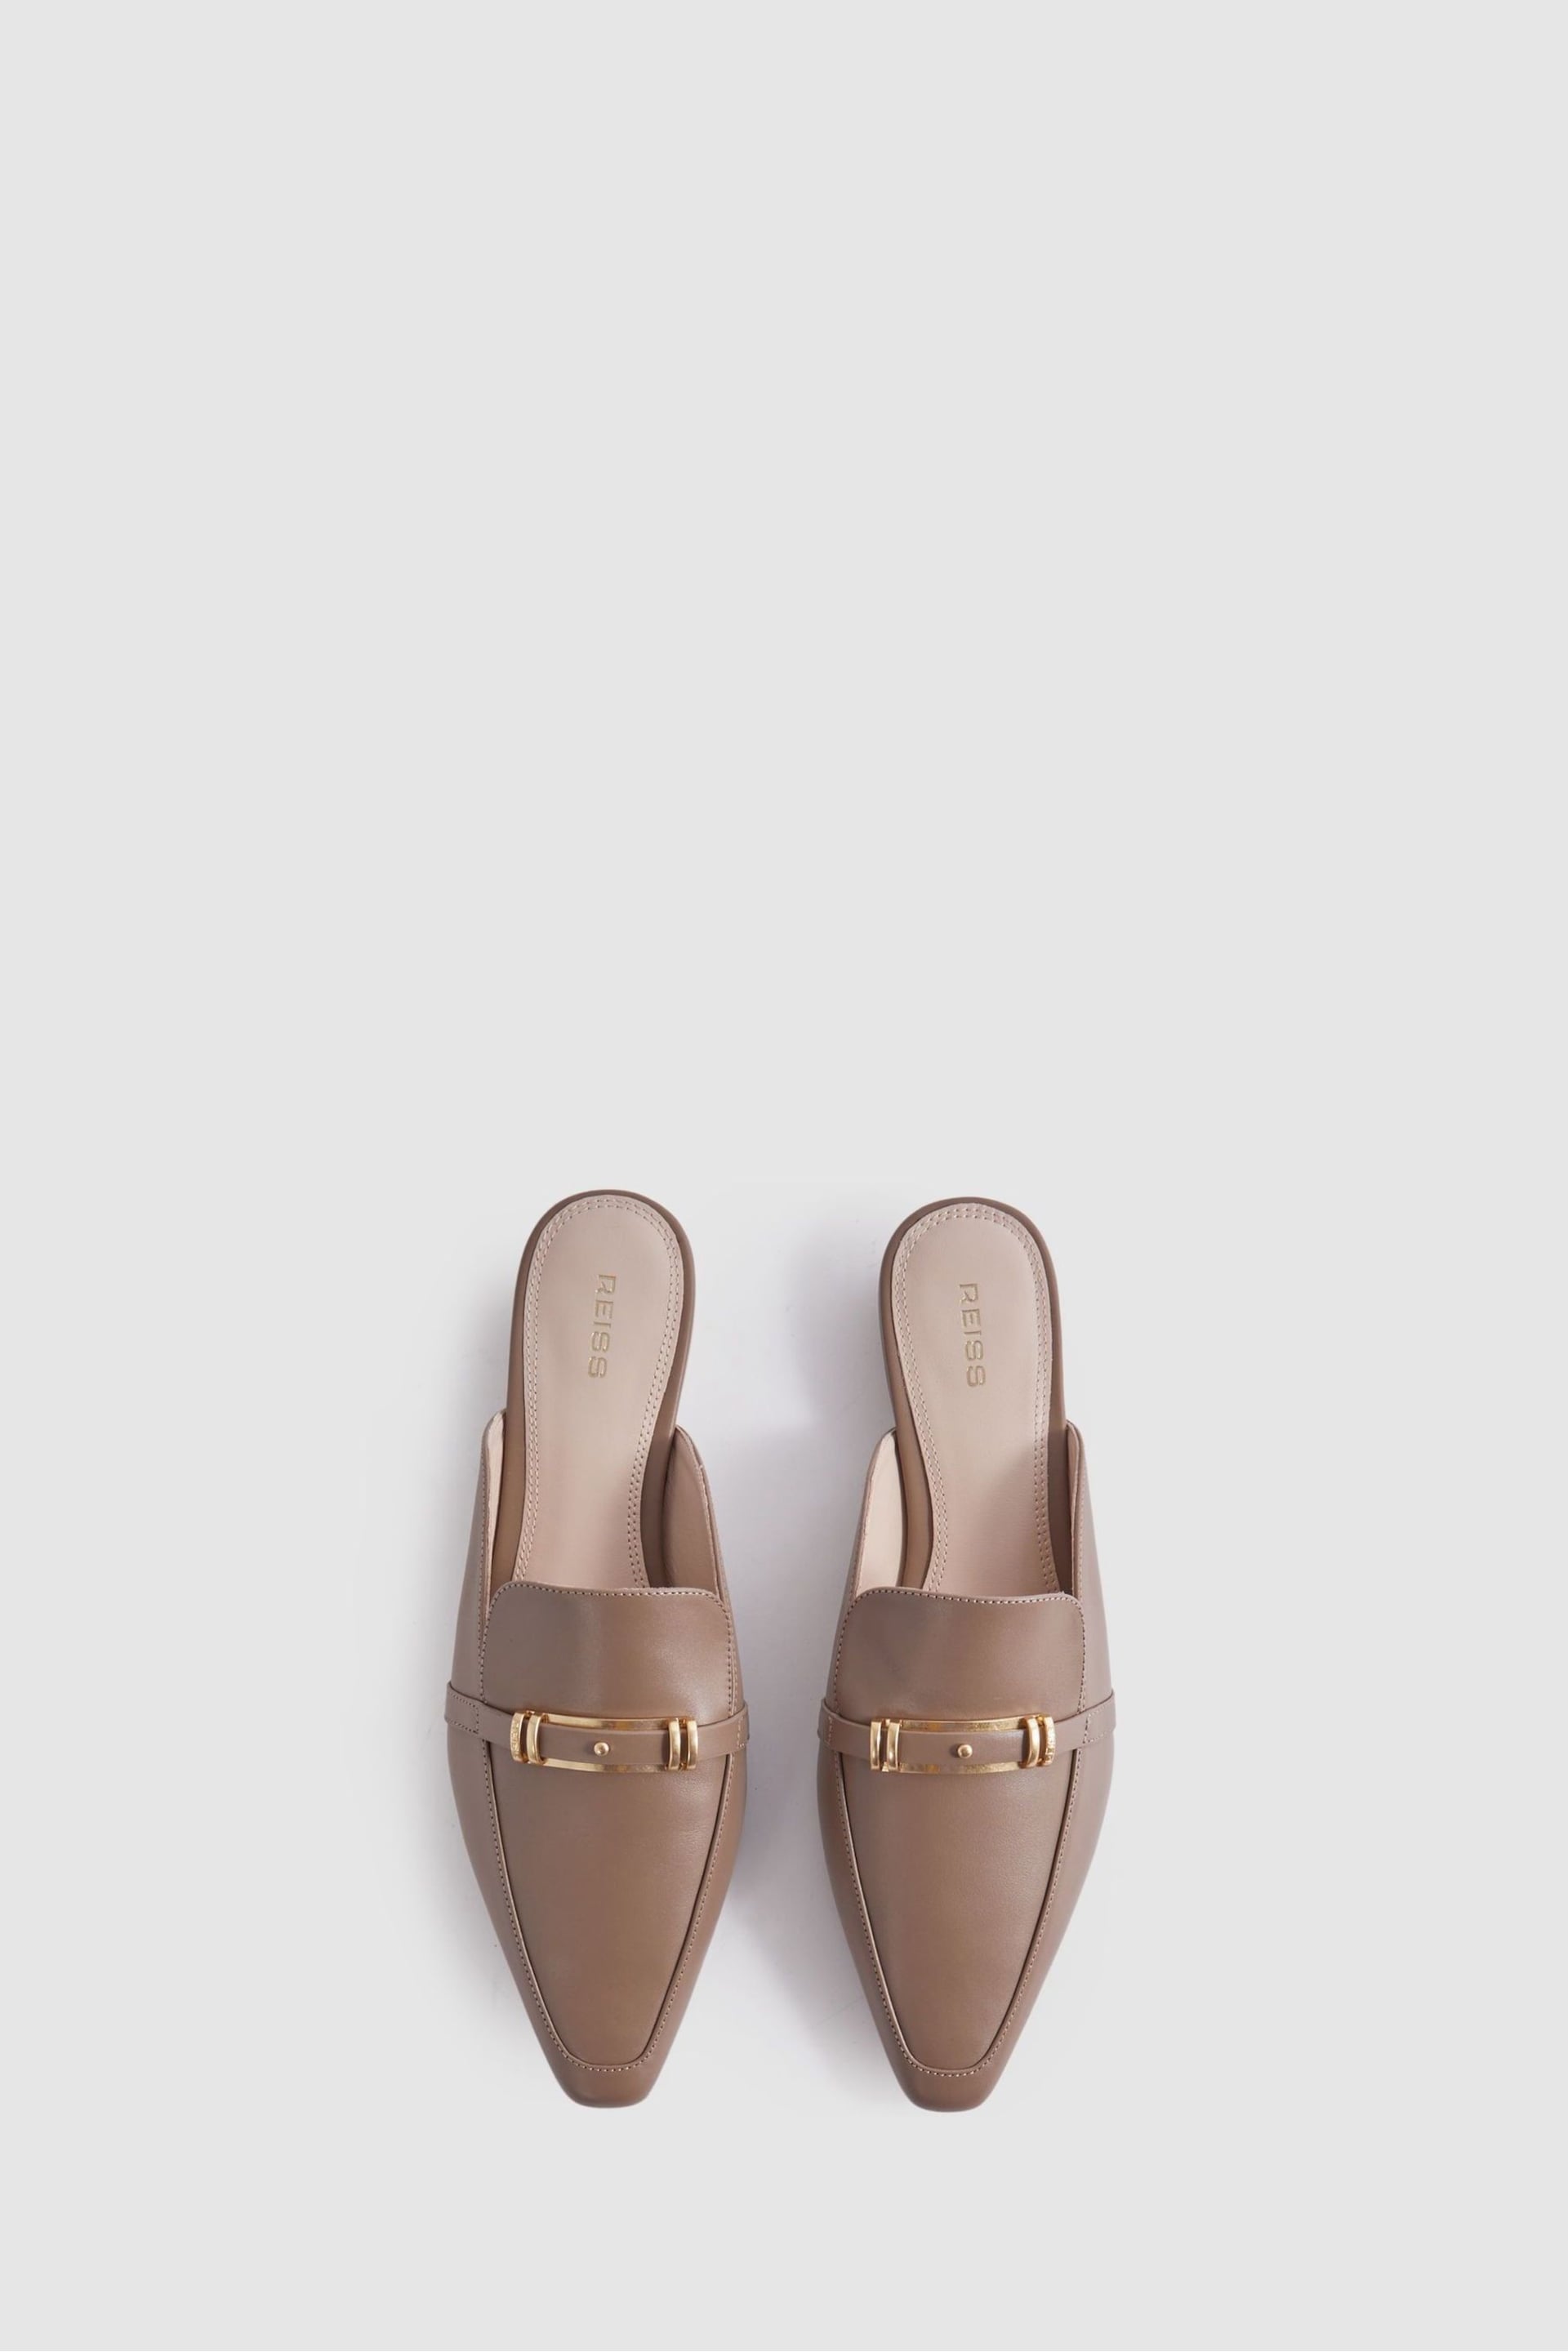 Reiss Taupe Meghan Flat Leather Mules - Image 3 of 5